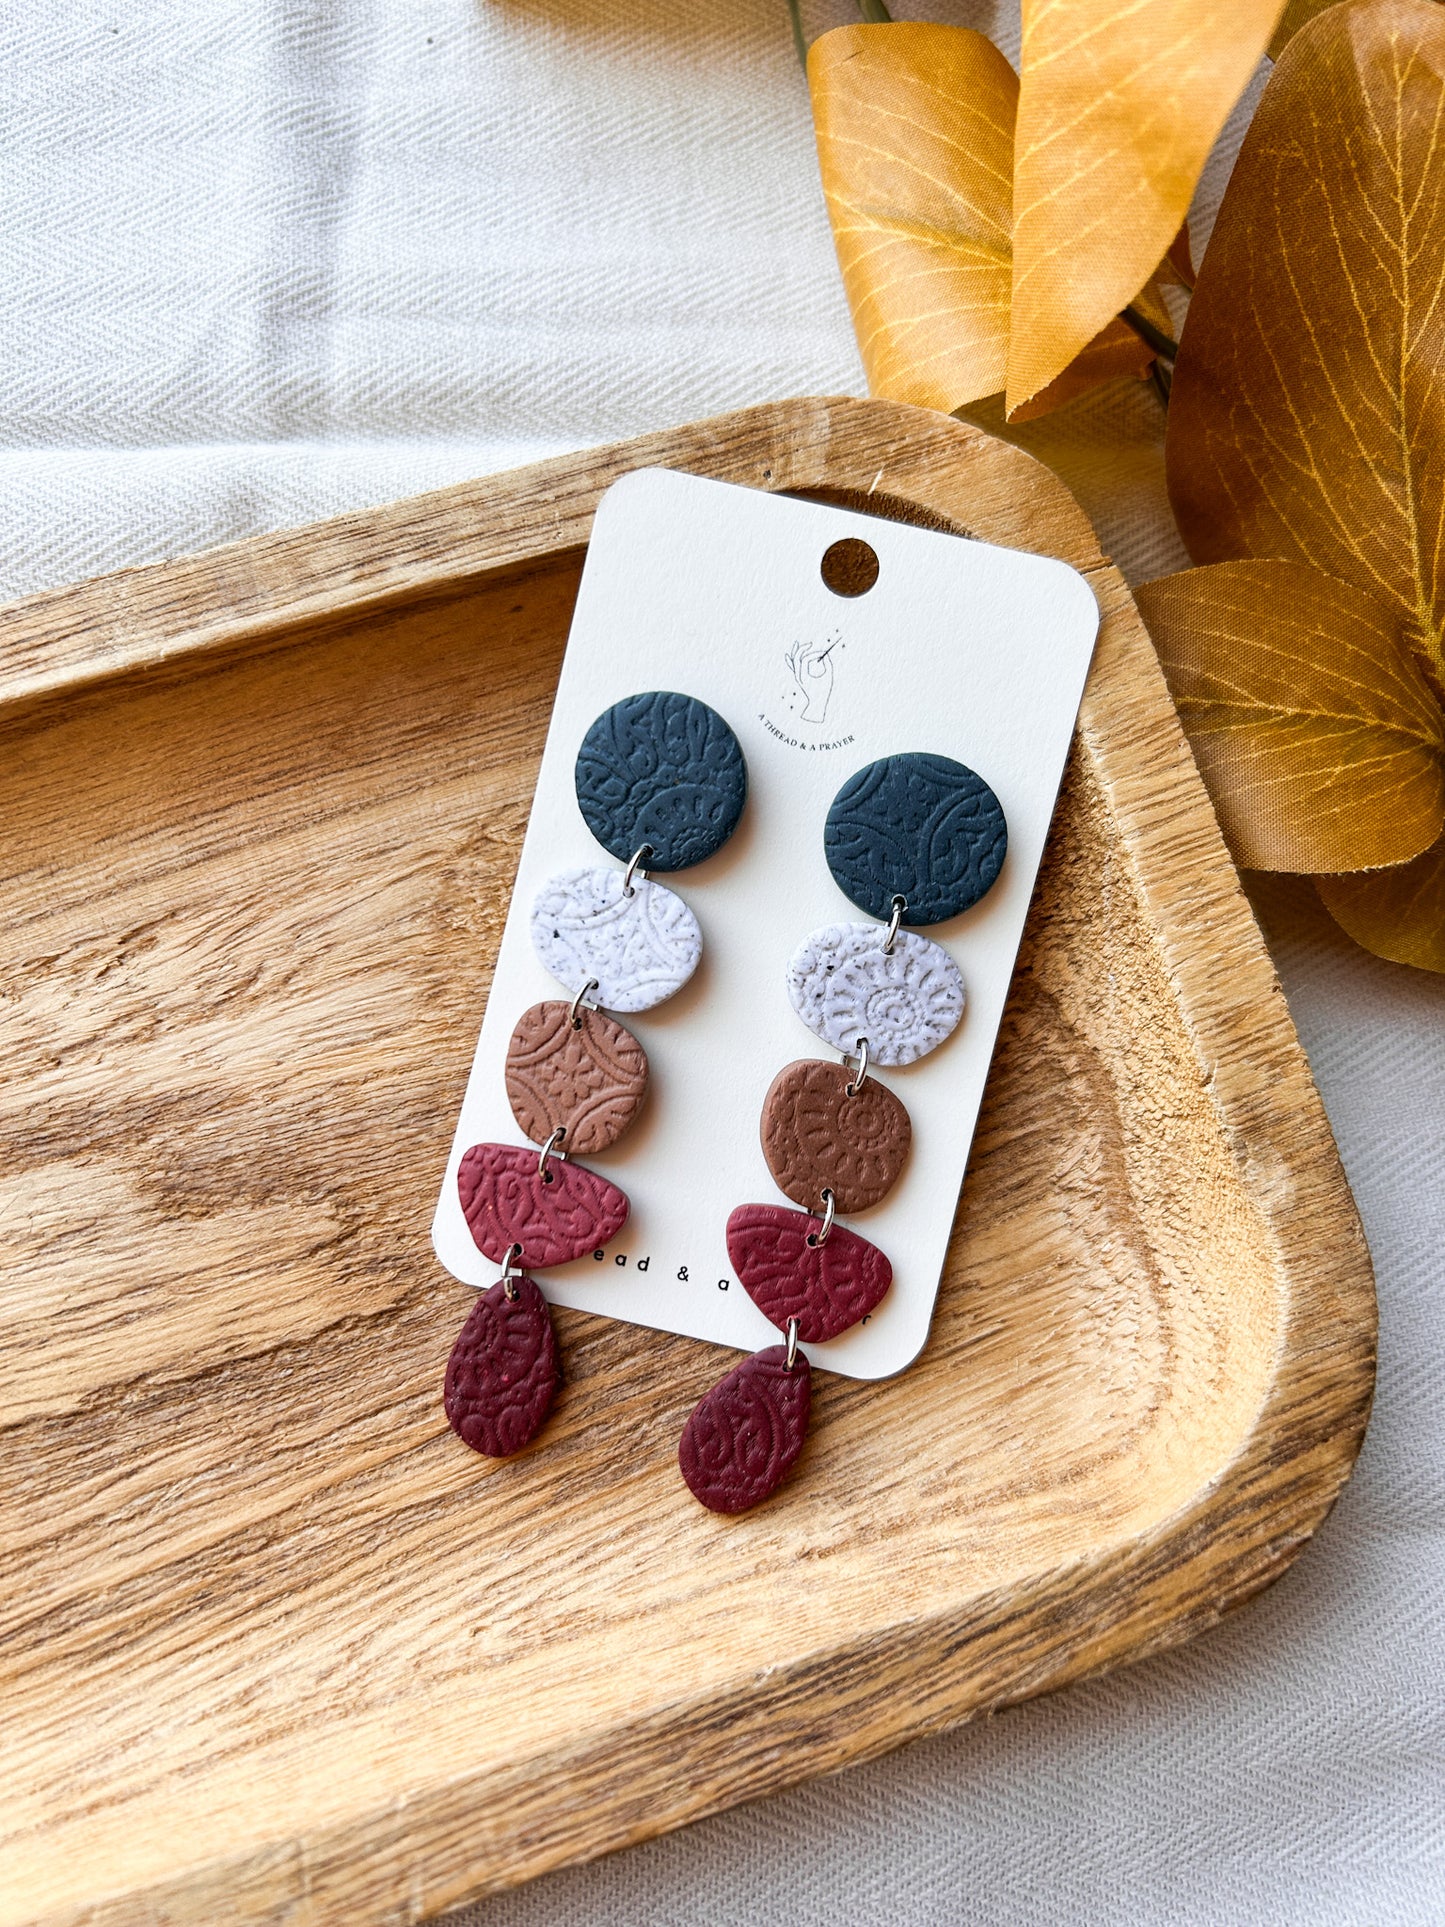 Winter Vibes Long Textured Clay Earrings | Fall Fashion | Autumn Earrings | Statement Earrings | Lightweight